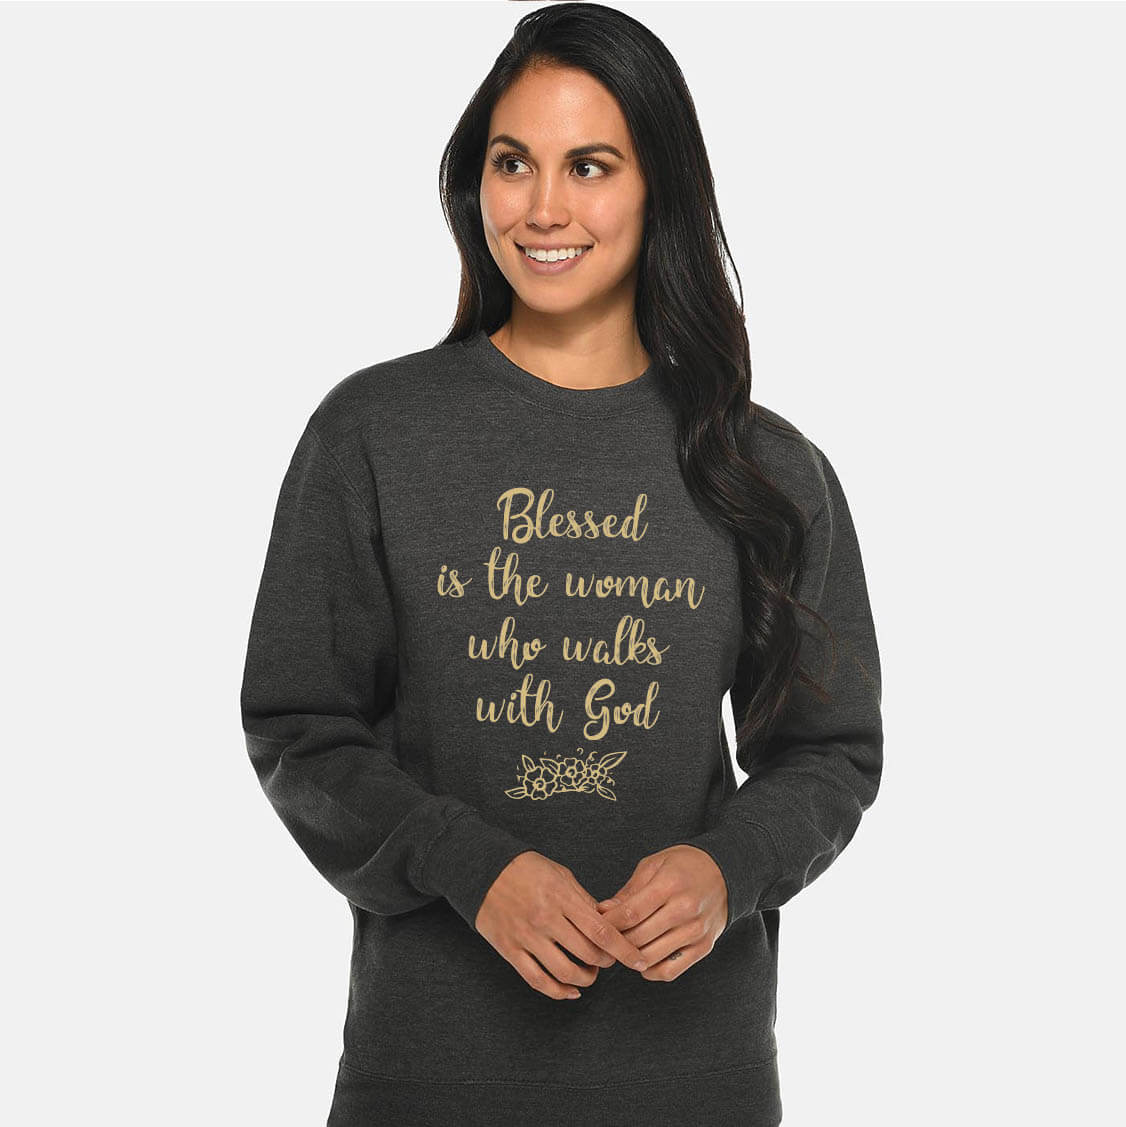 Blessed Is The Woman Who Walks With God Unisex Crewneck Sweatshirt FINAL SALE ITEM